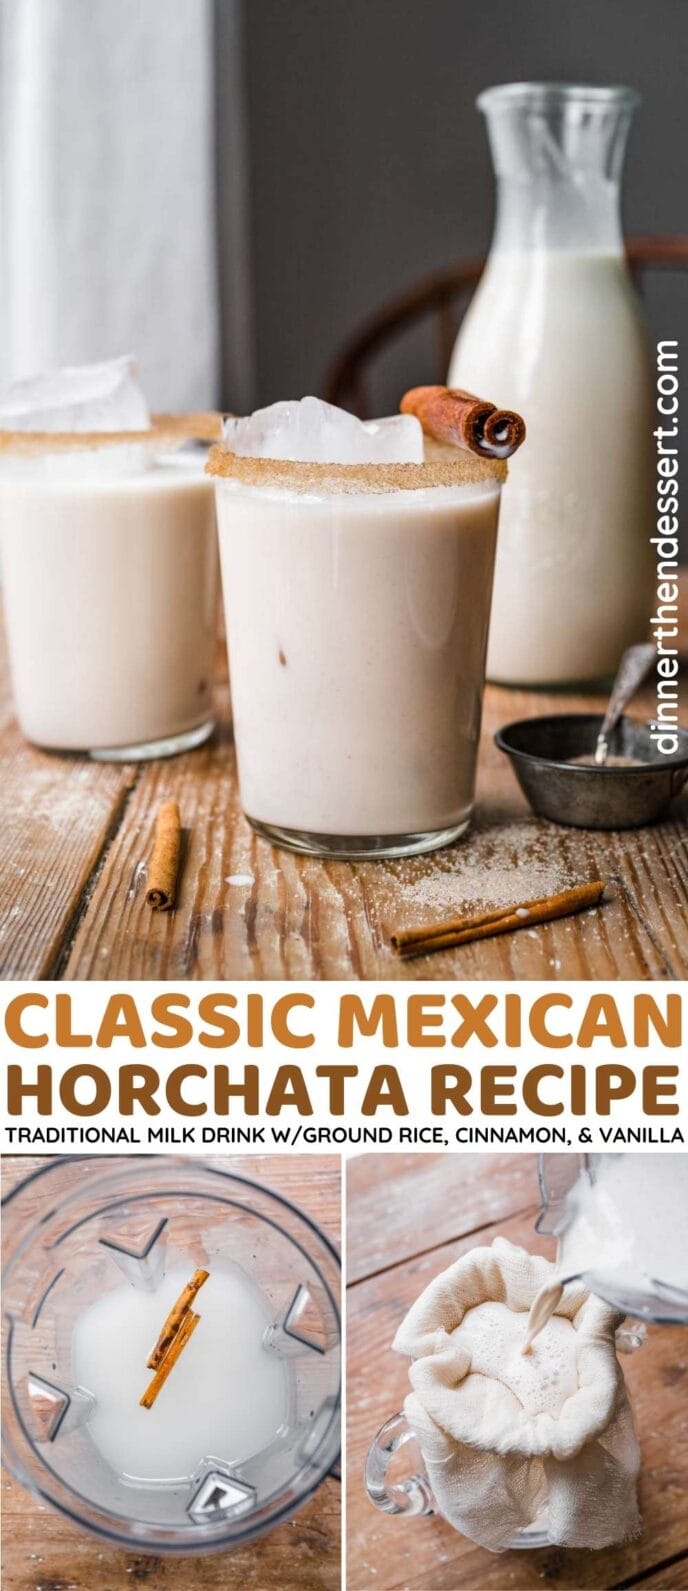 Classic Horchata Collage